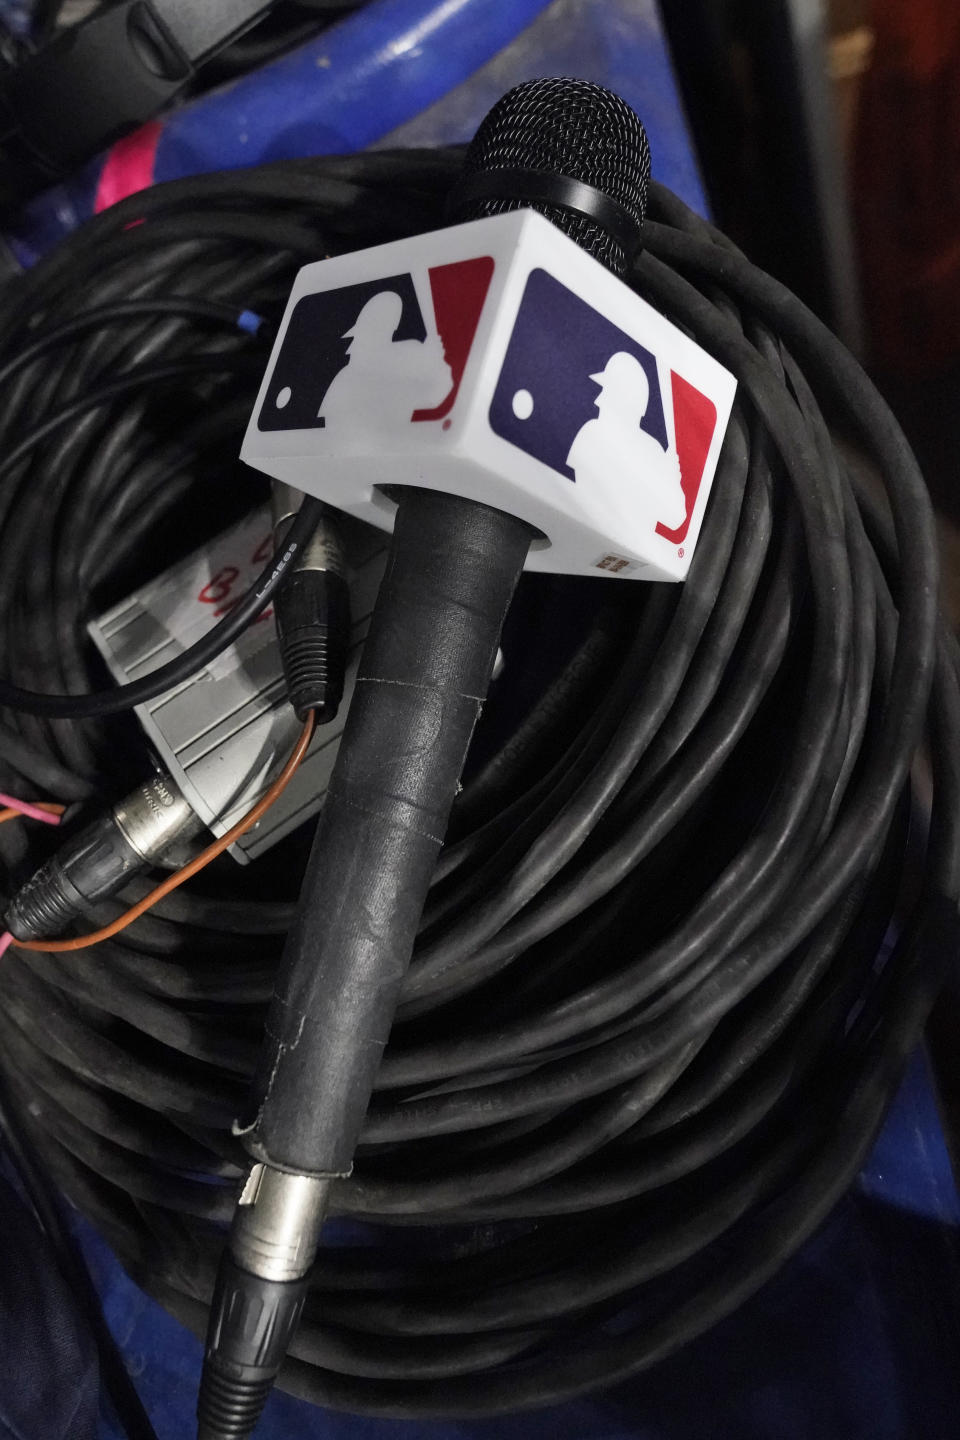 A microphone belonging to a field reporter for the San Diego Padres sits on top of audio cables during a baseball game between the Miami Marlins and the Padres, Wednesday, May 31, 2023, in Miami. Major League Baseball took over broadcasts of the Padres' games Wednesday. (AP Photo/Wilfredo Lee)